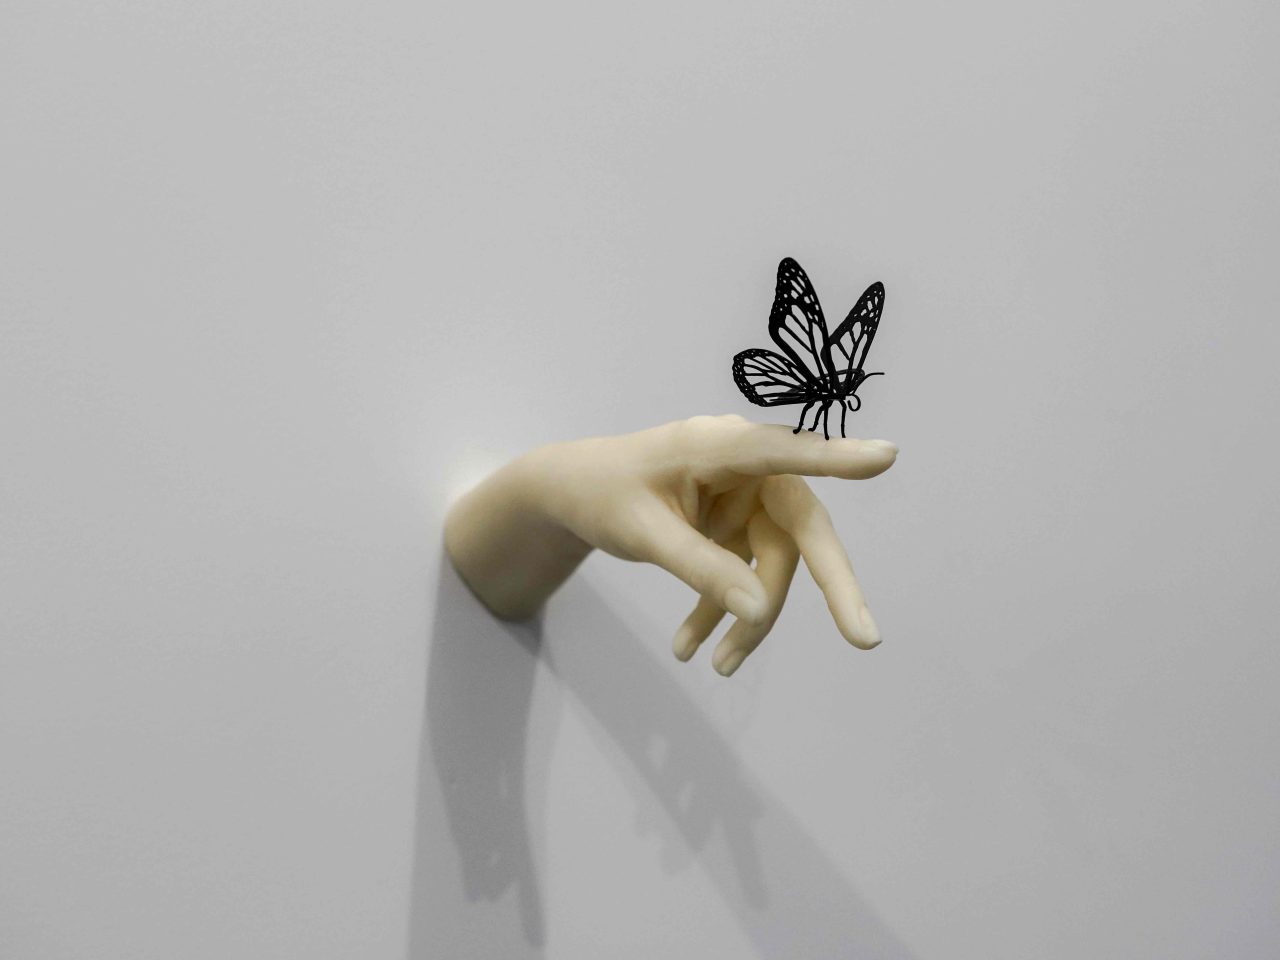 Sculpture of a cream colored hand with black butterfly on finger